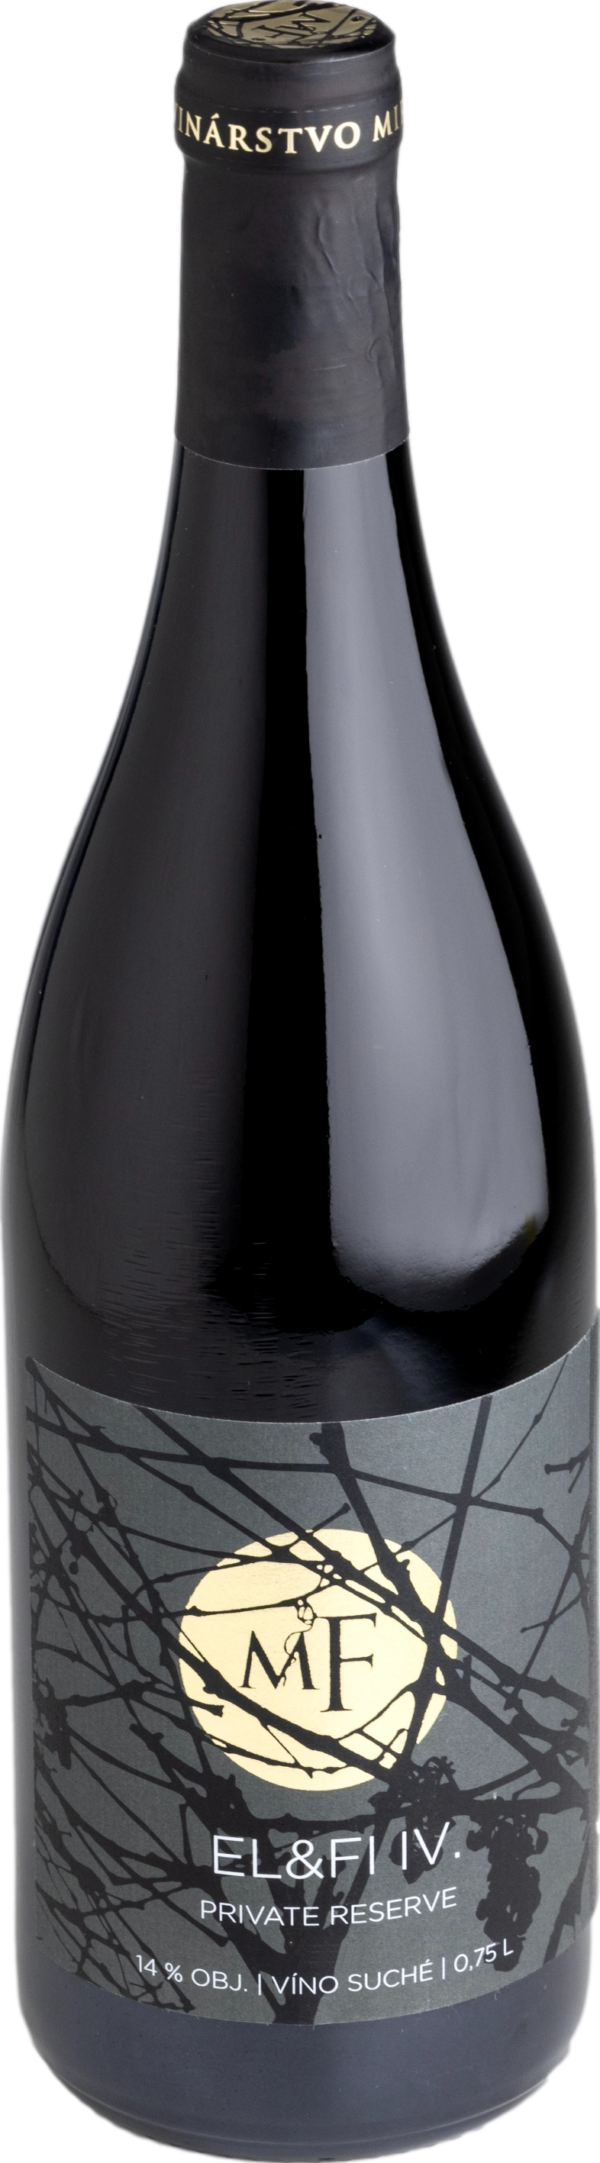 Product image of Miro Fondrk EL&FI IV Private Reserve 2018 from 8wines